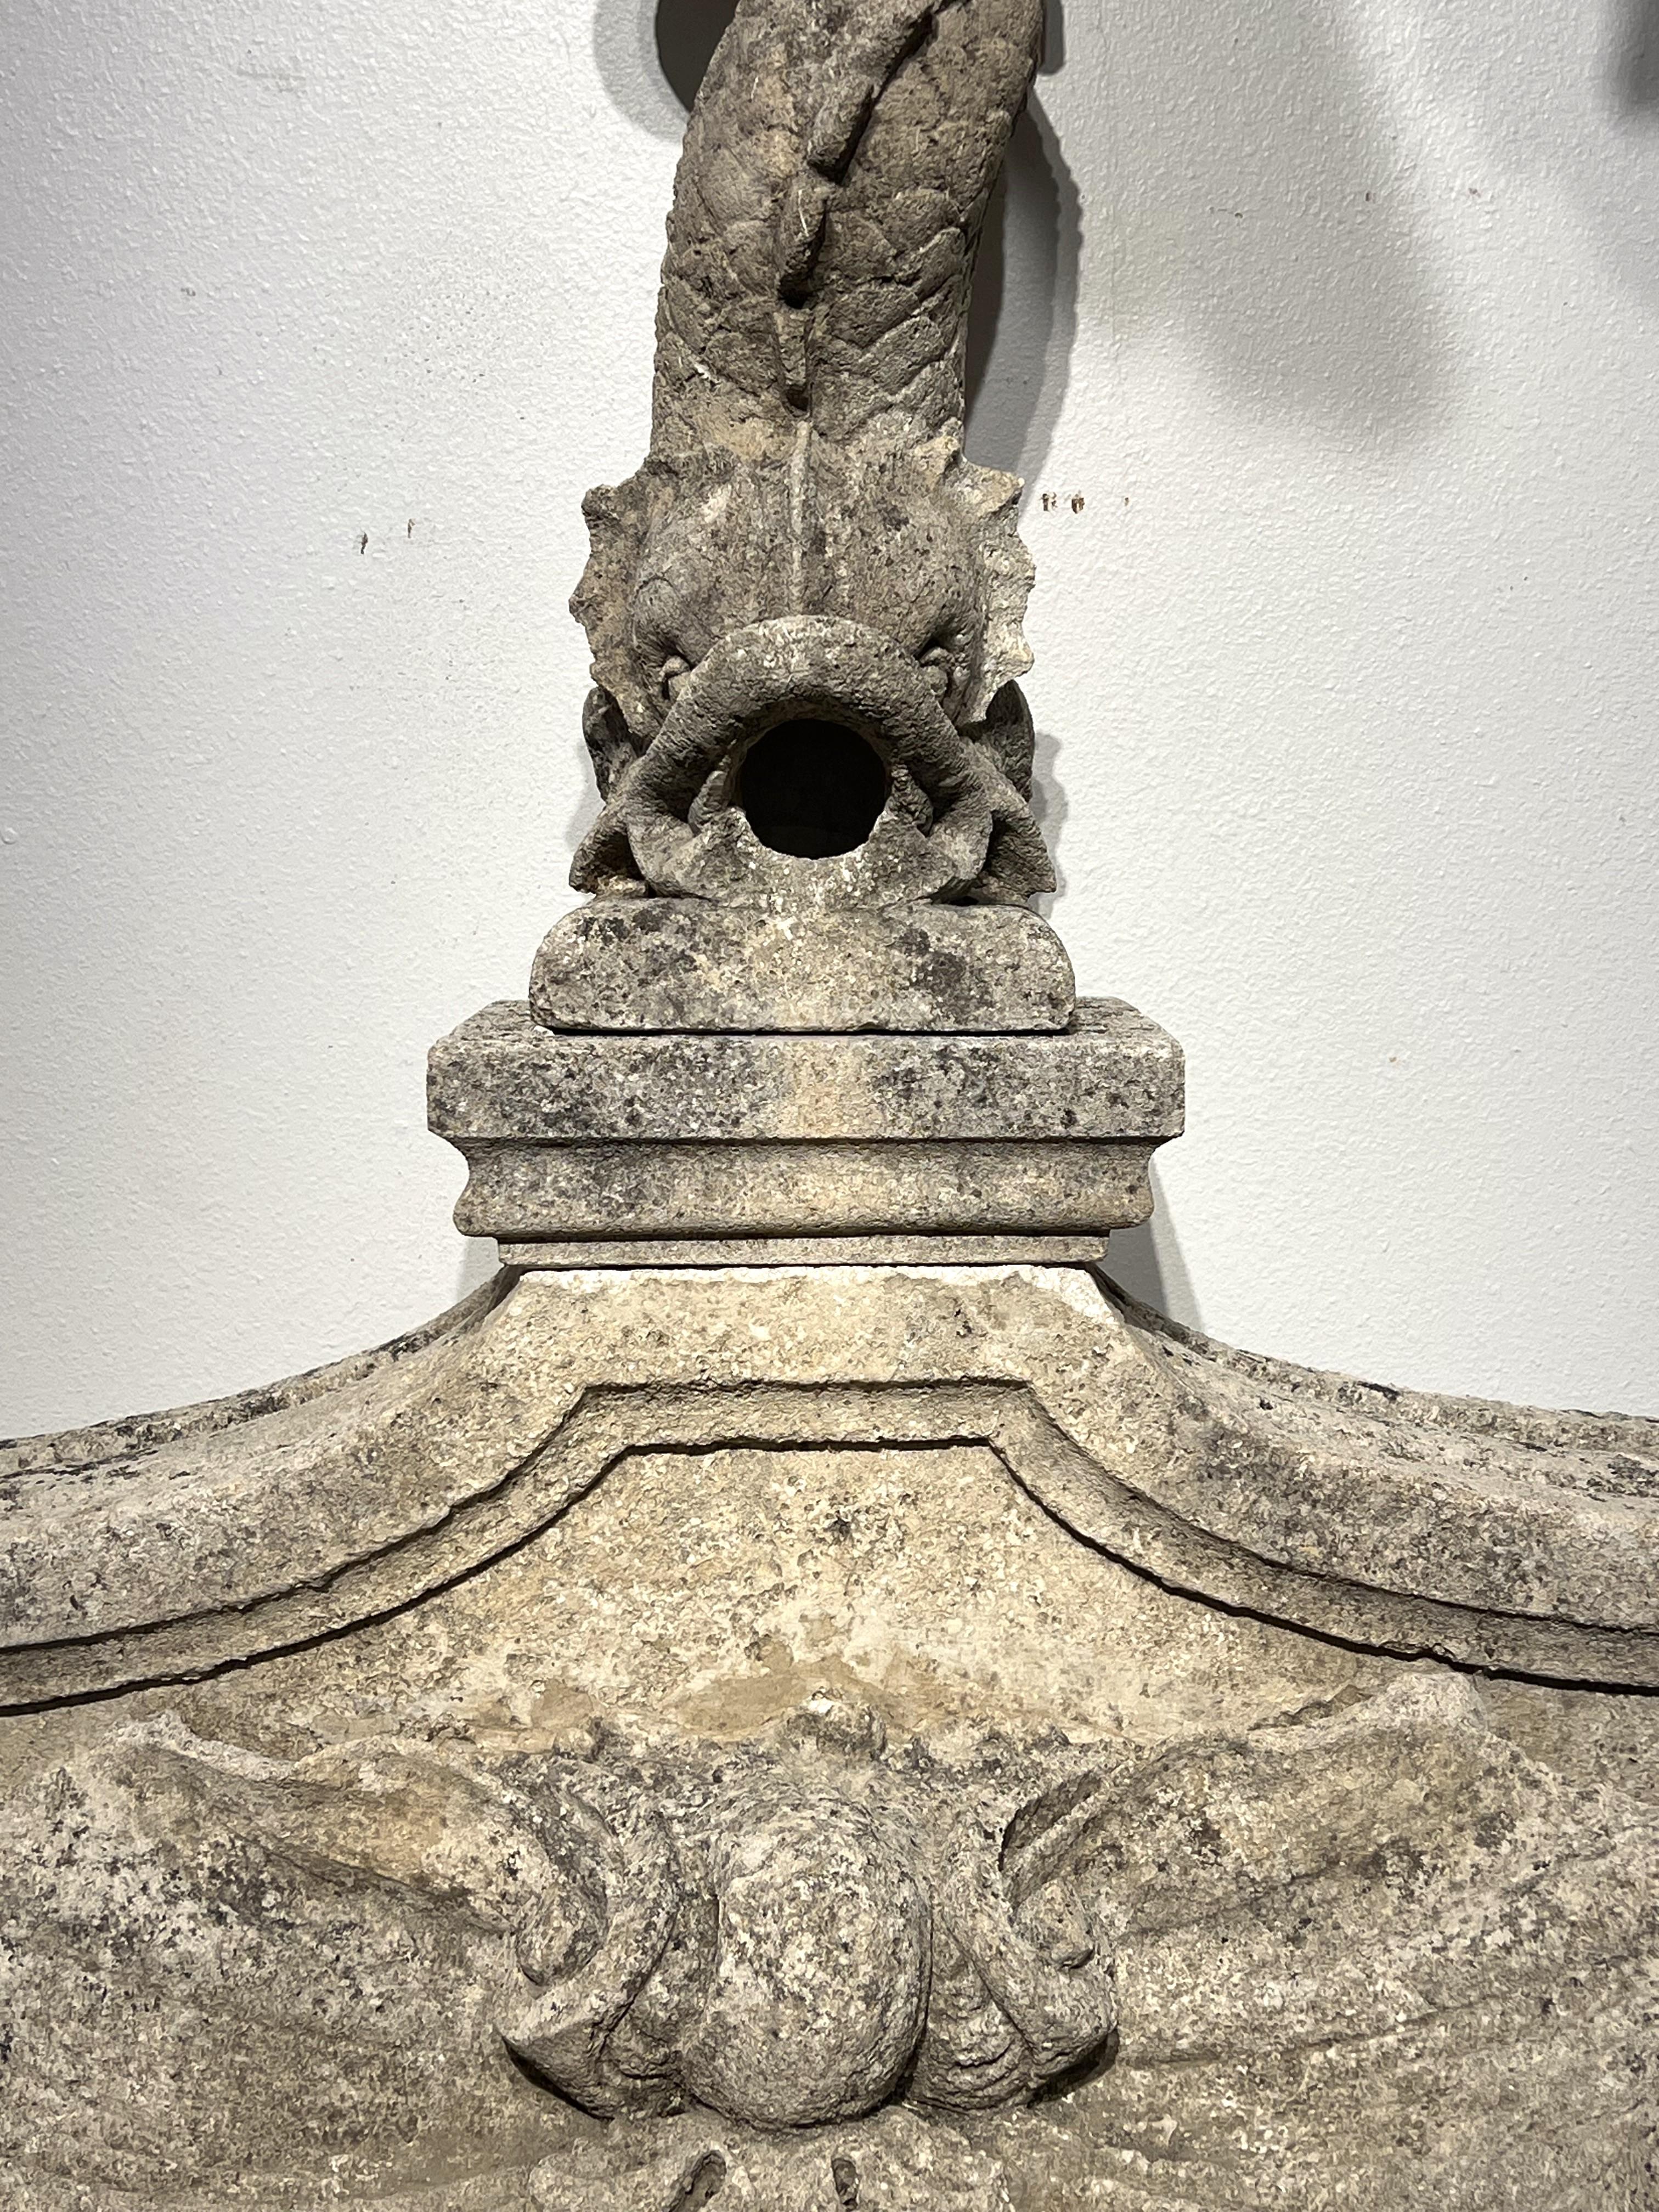 Consisting of four pieces of hand-carved French limestone, this fantastic dolphin fountain element dates to circa 1890 and measures nearly 6.5 feet tall. All four stones are cream-colored and have developed a wonderful patination, but each piece has